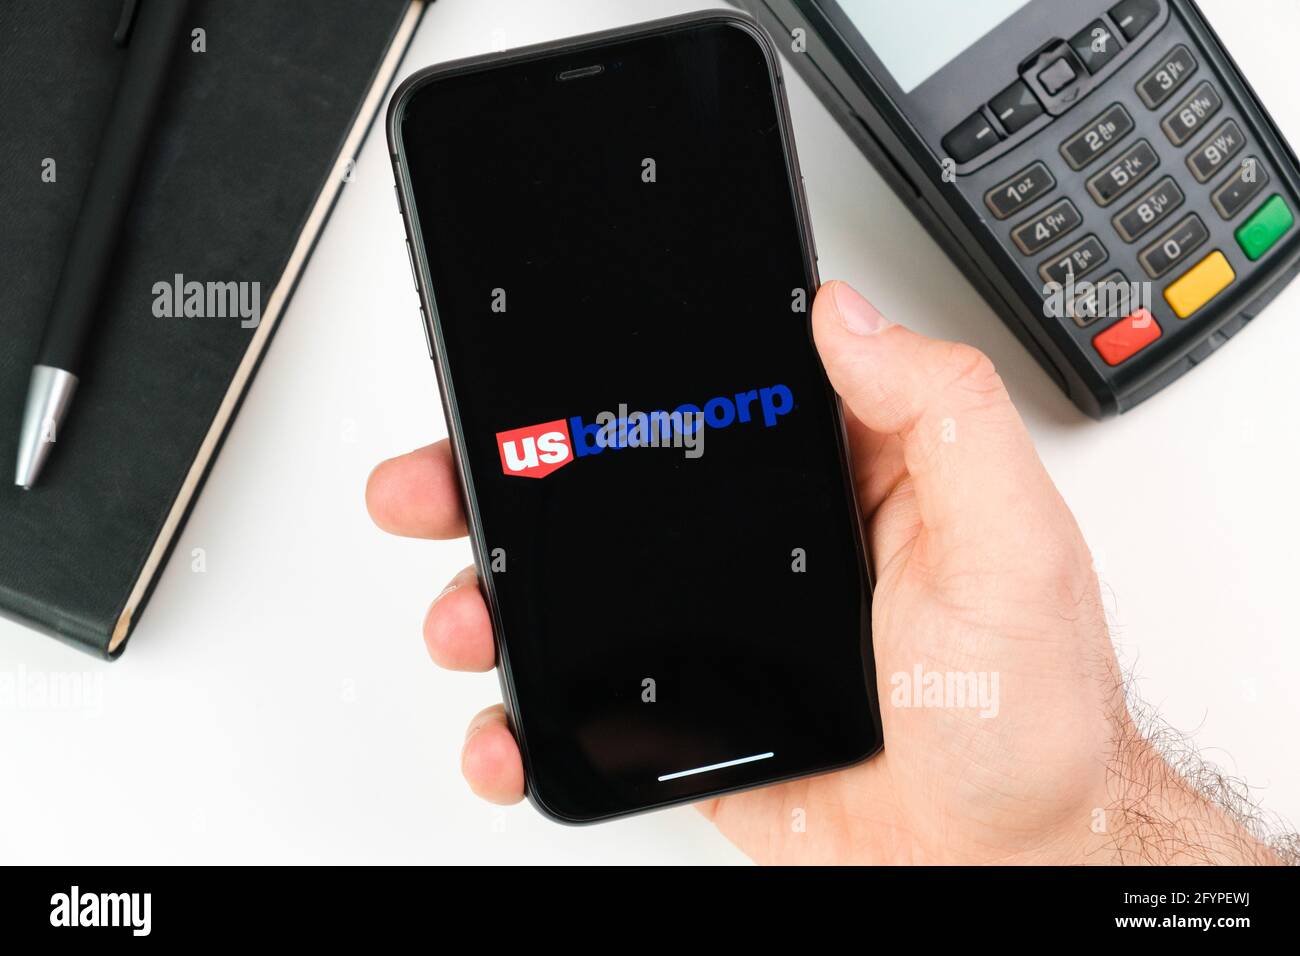 US bank logo on the black smartphone screen in mans hand on the background of payment terminal, May 2021, San Francisco, USA Stock Photo